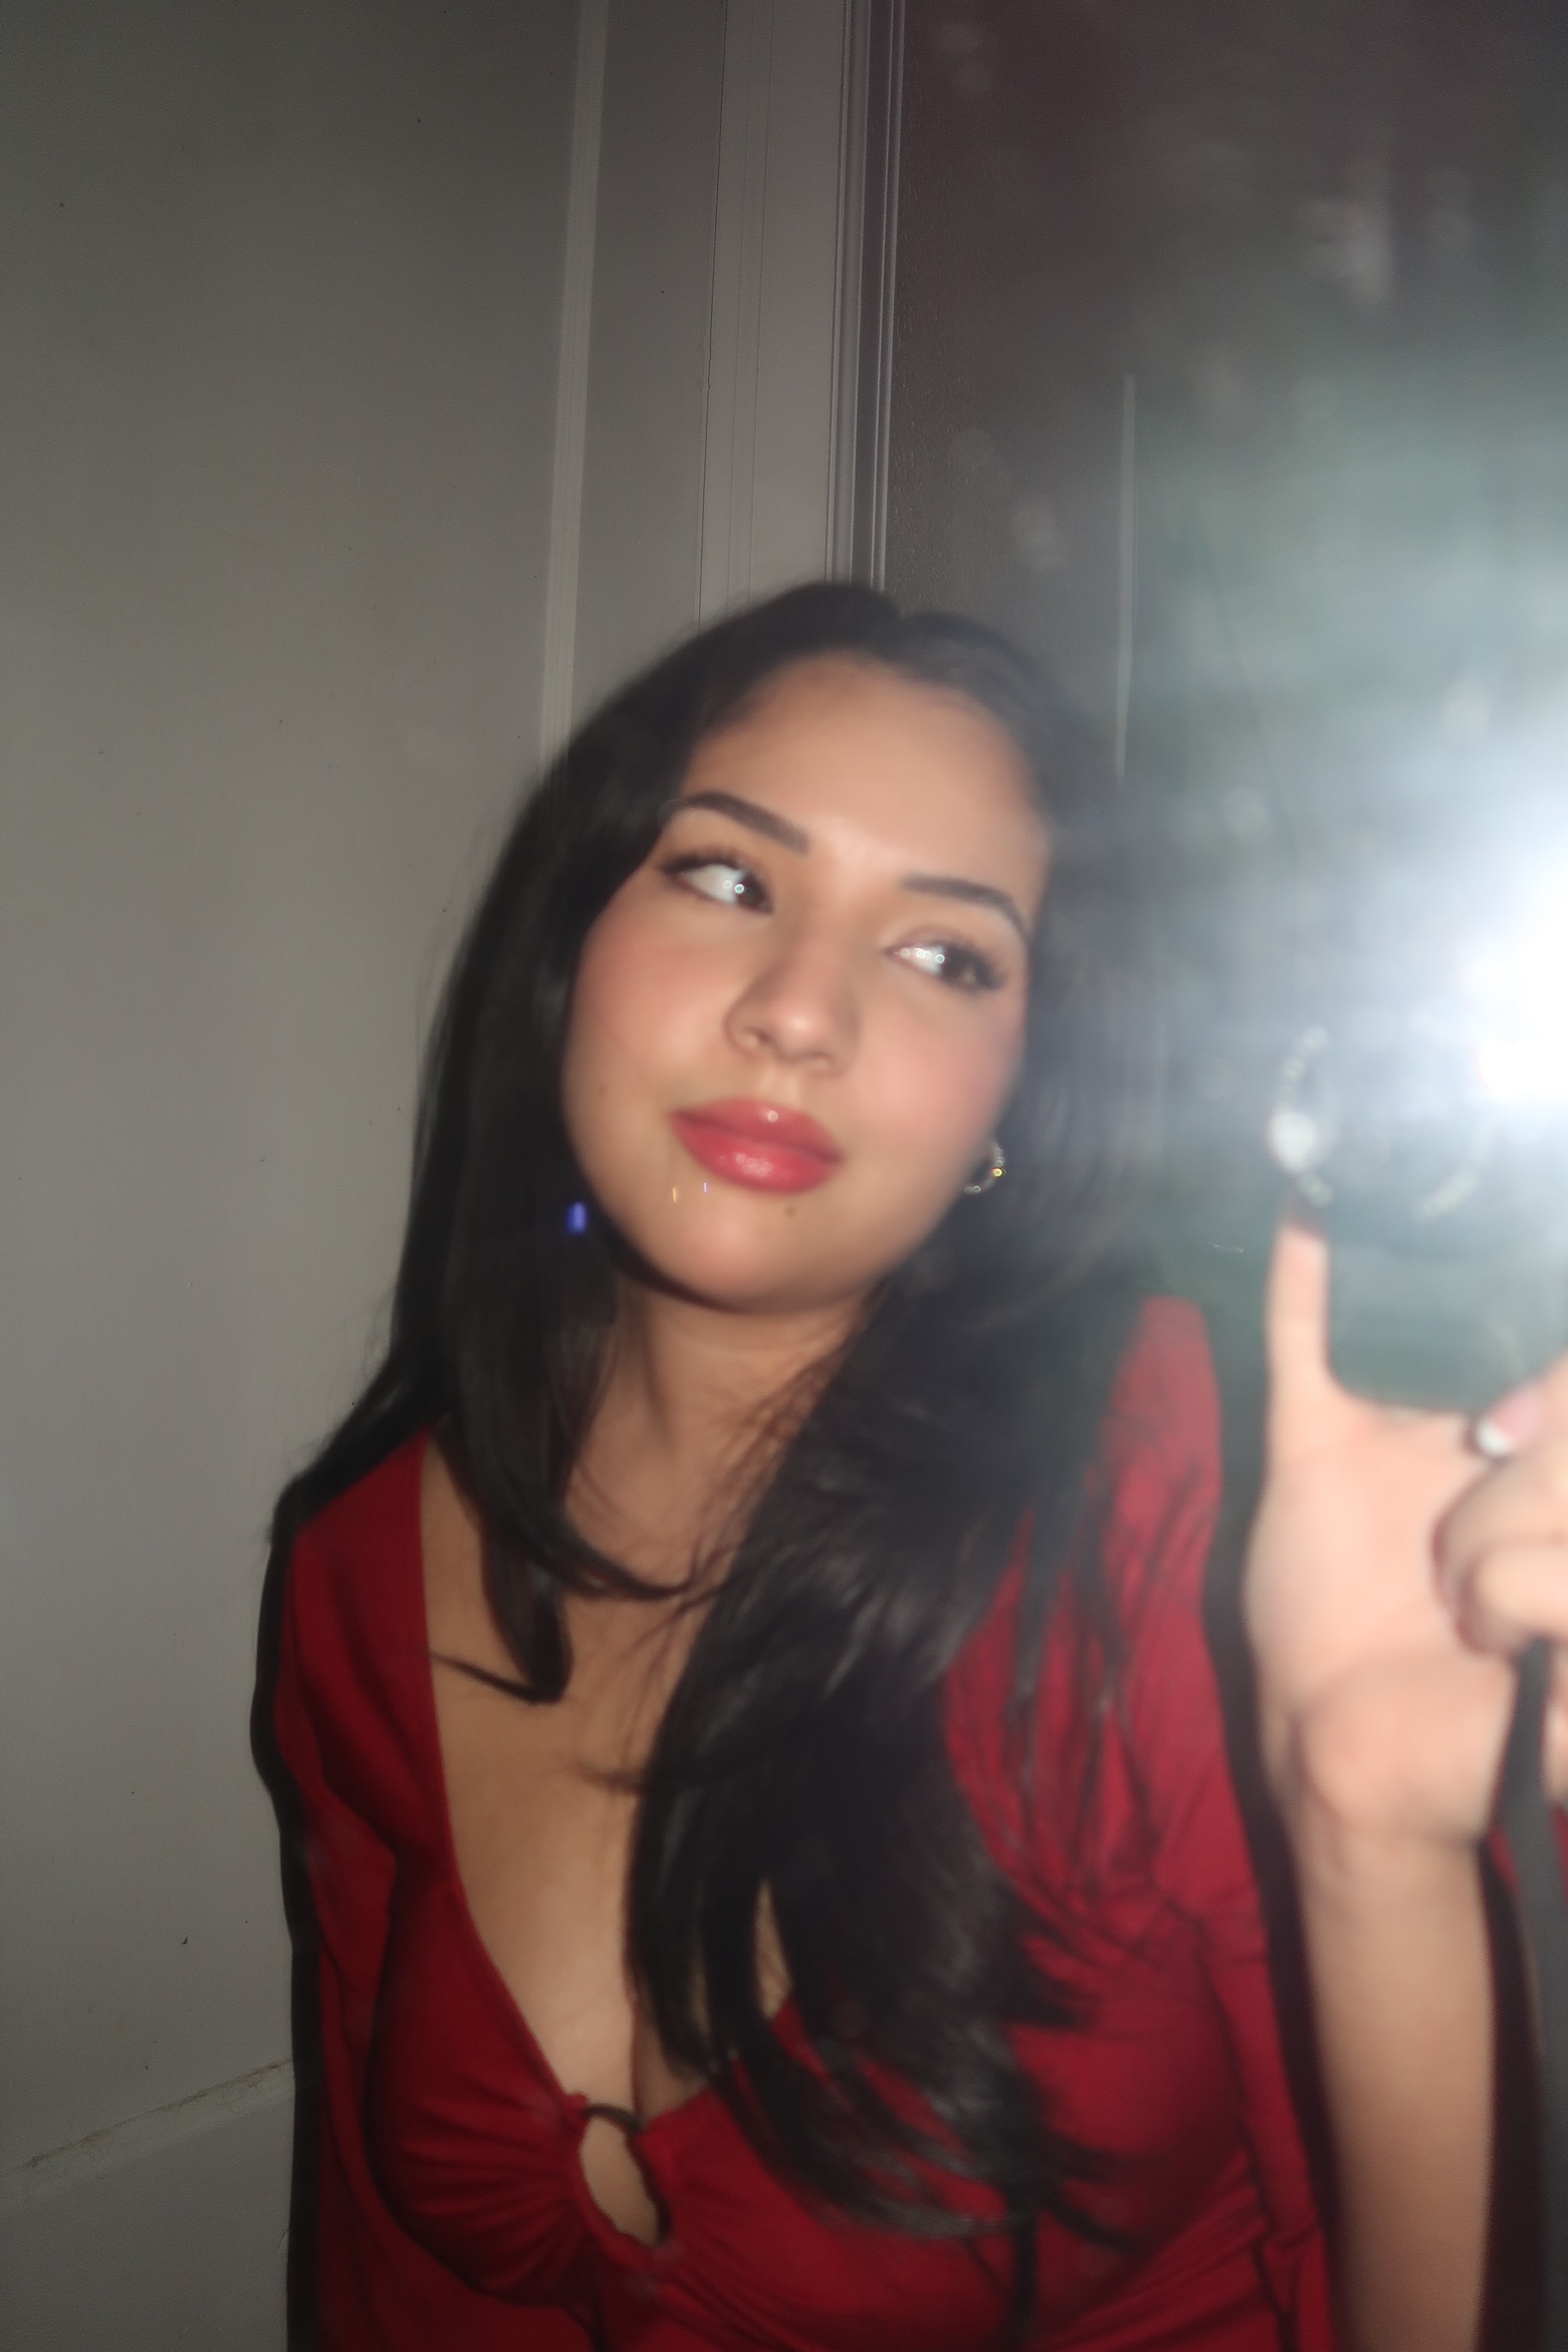 A person is taking a photo in the mirror, the camera flash shining to the right of the image. This person has long brown hair and is dressed in a red dress. Leaning forward slightly with a soft smile.